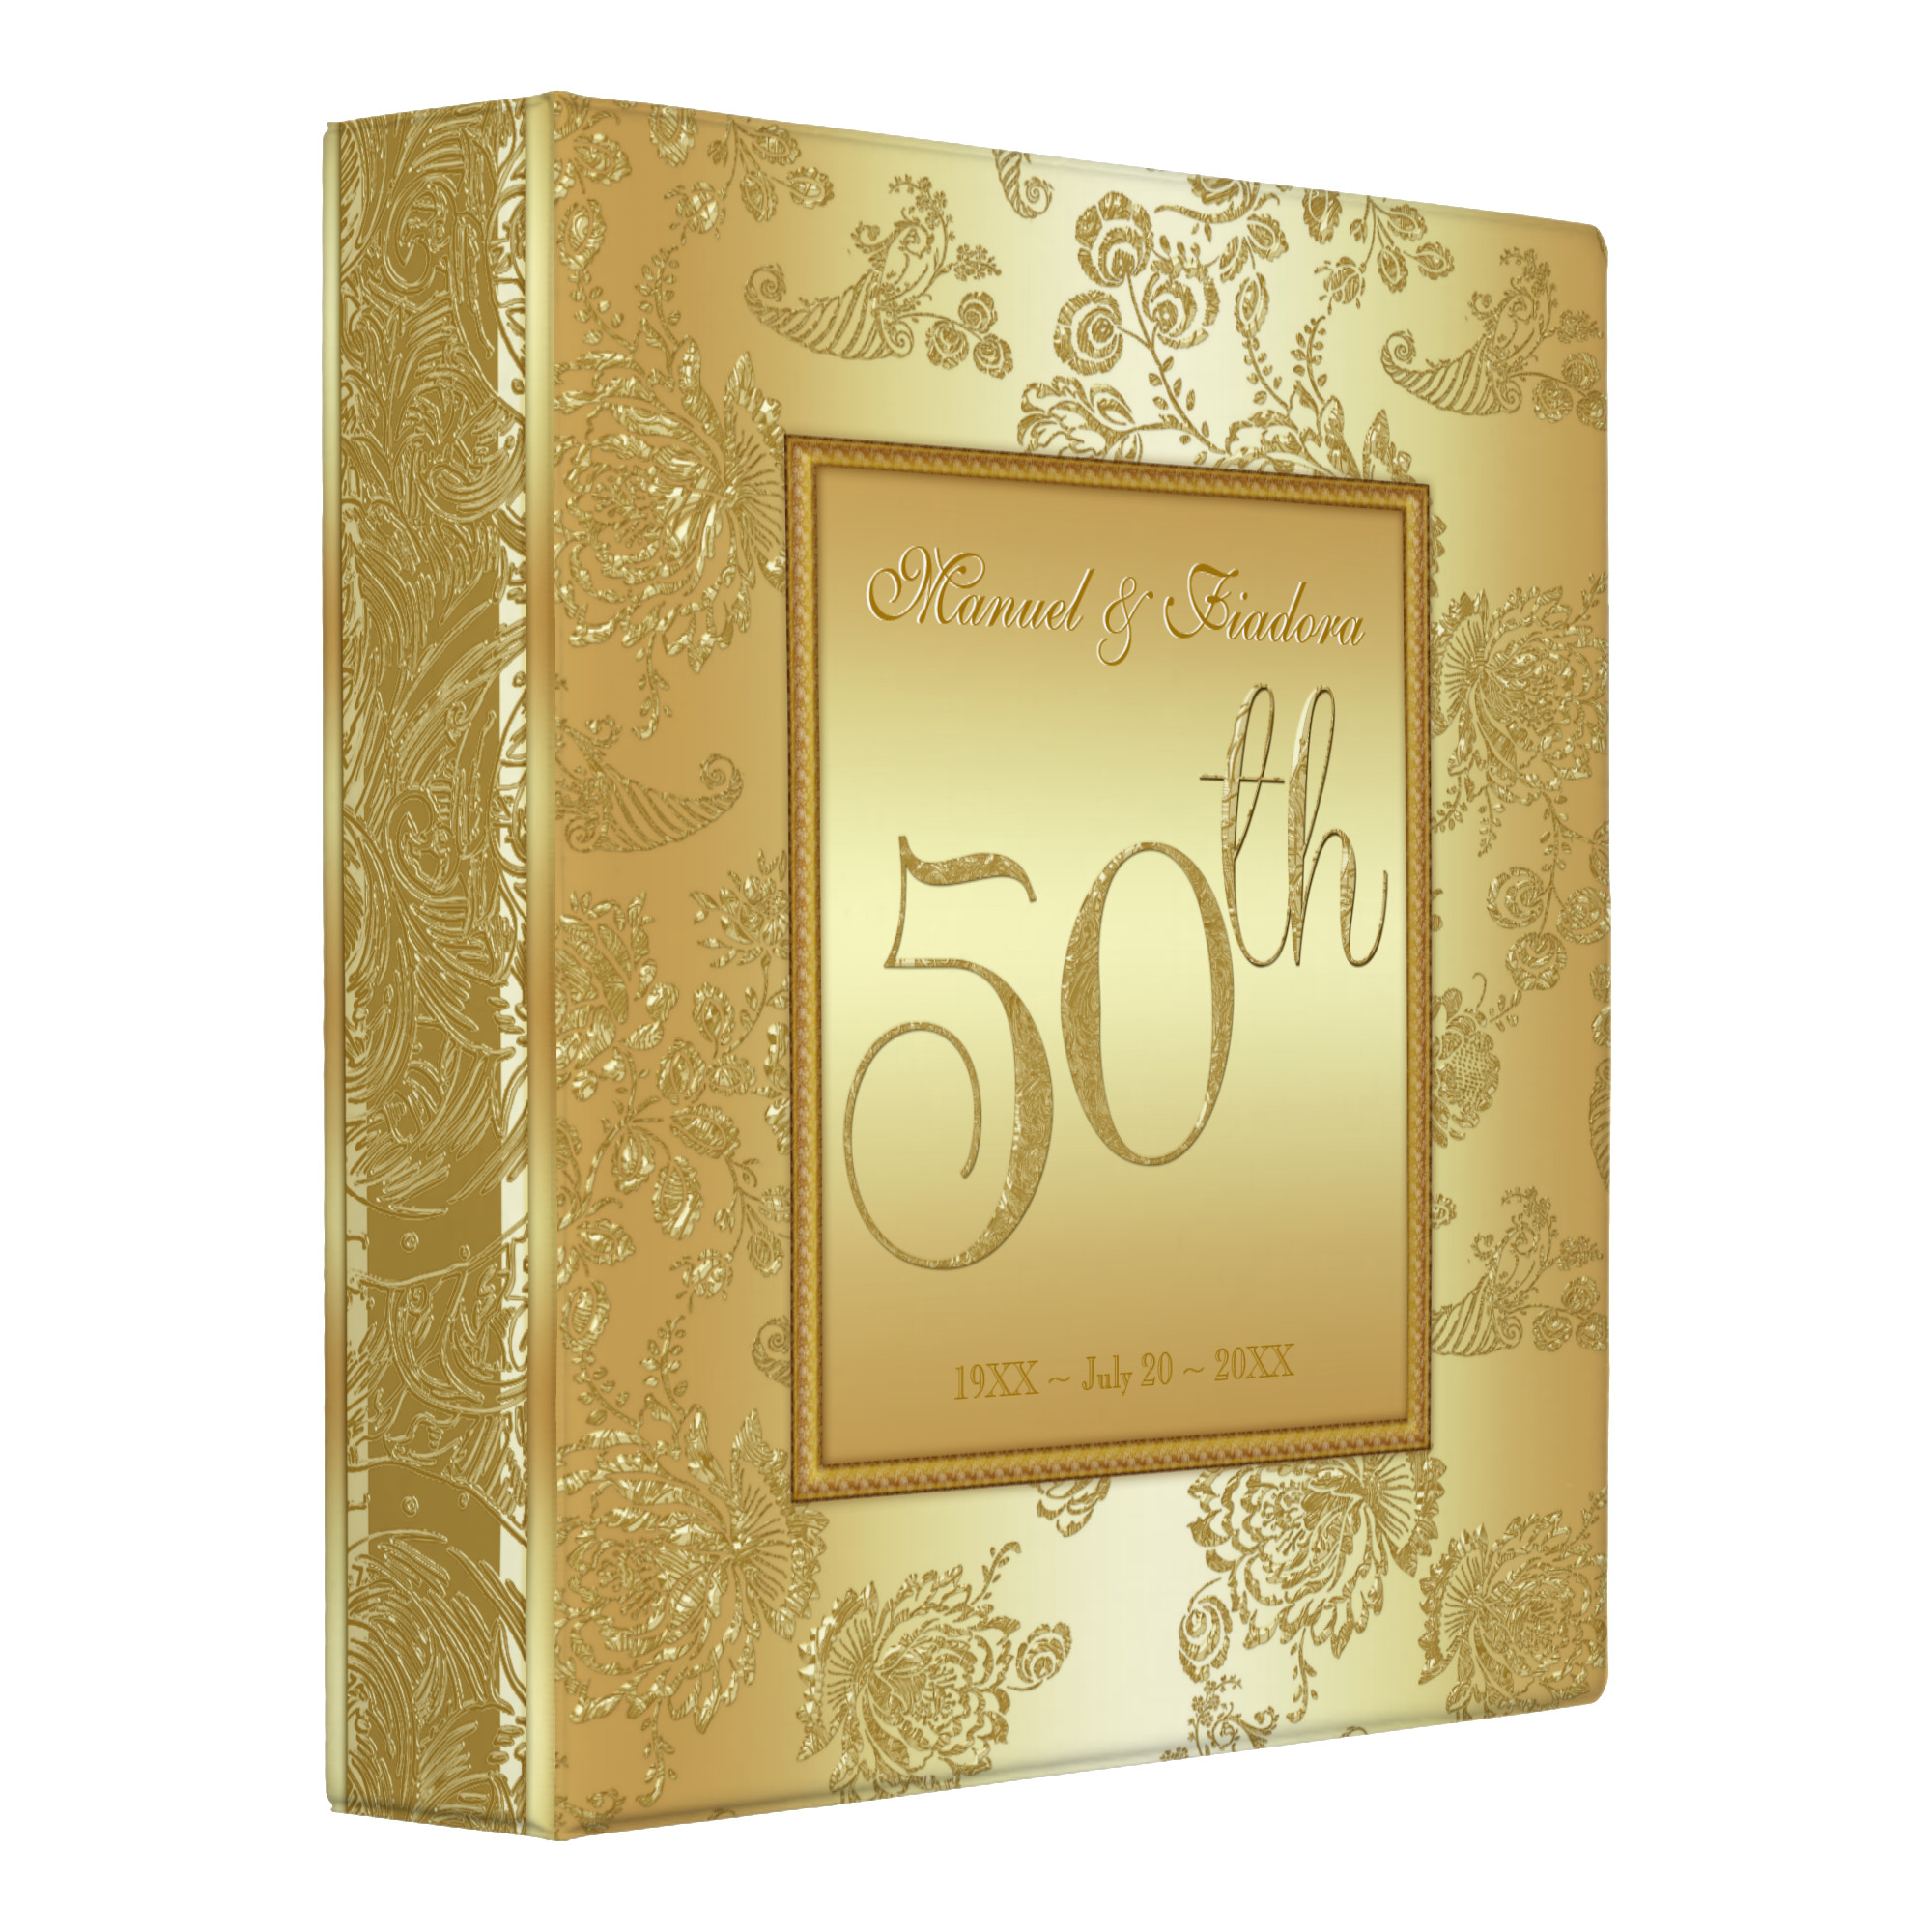 Fiftieth Anniversary Gift Ideas
 Others Enchanting 50th Wedding Anniversary Gift Ideas